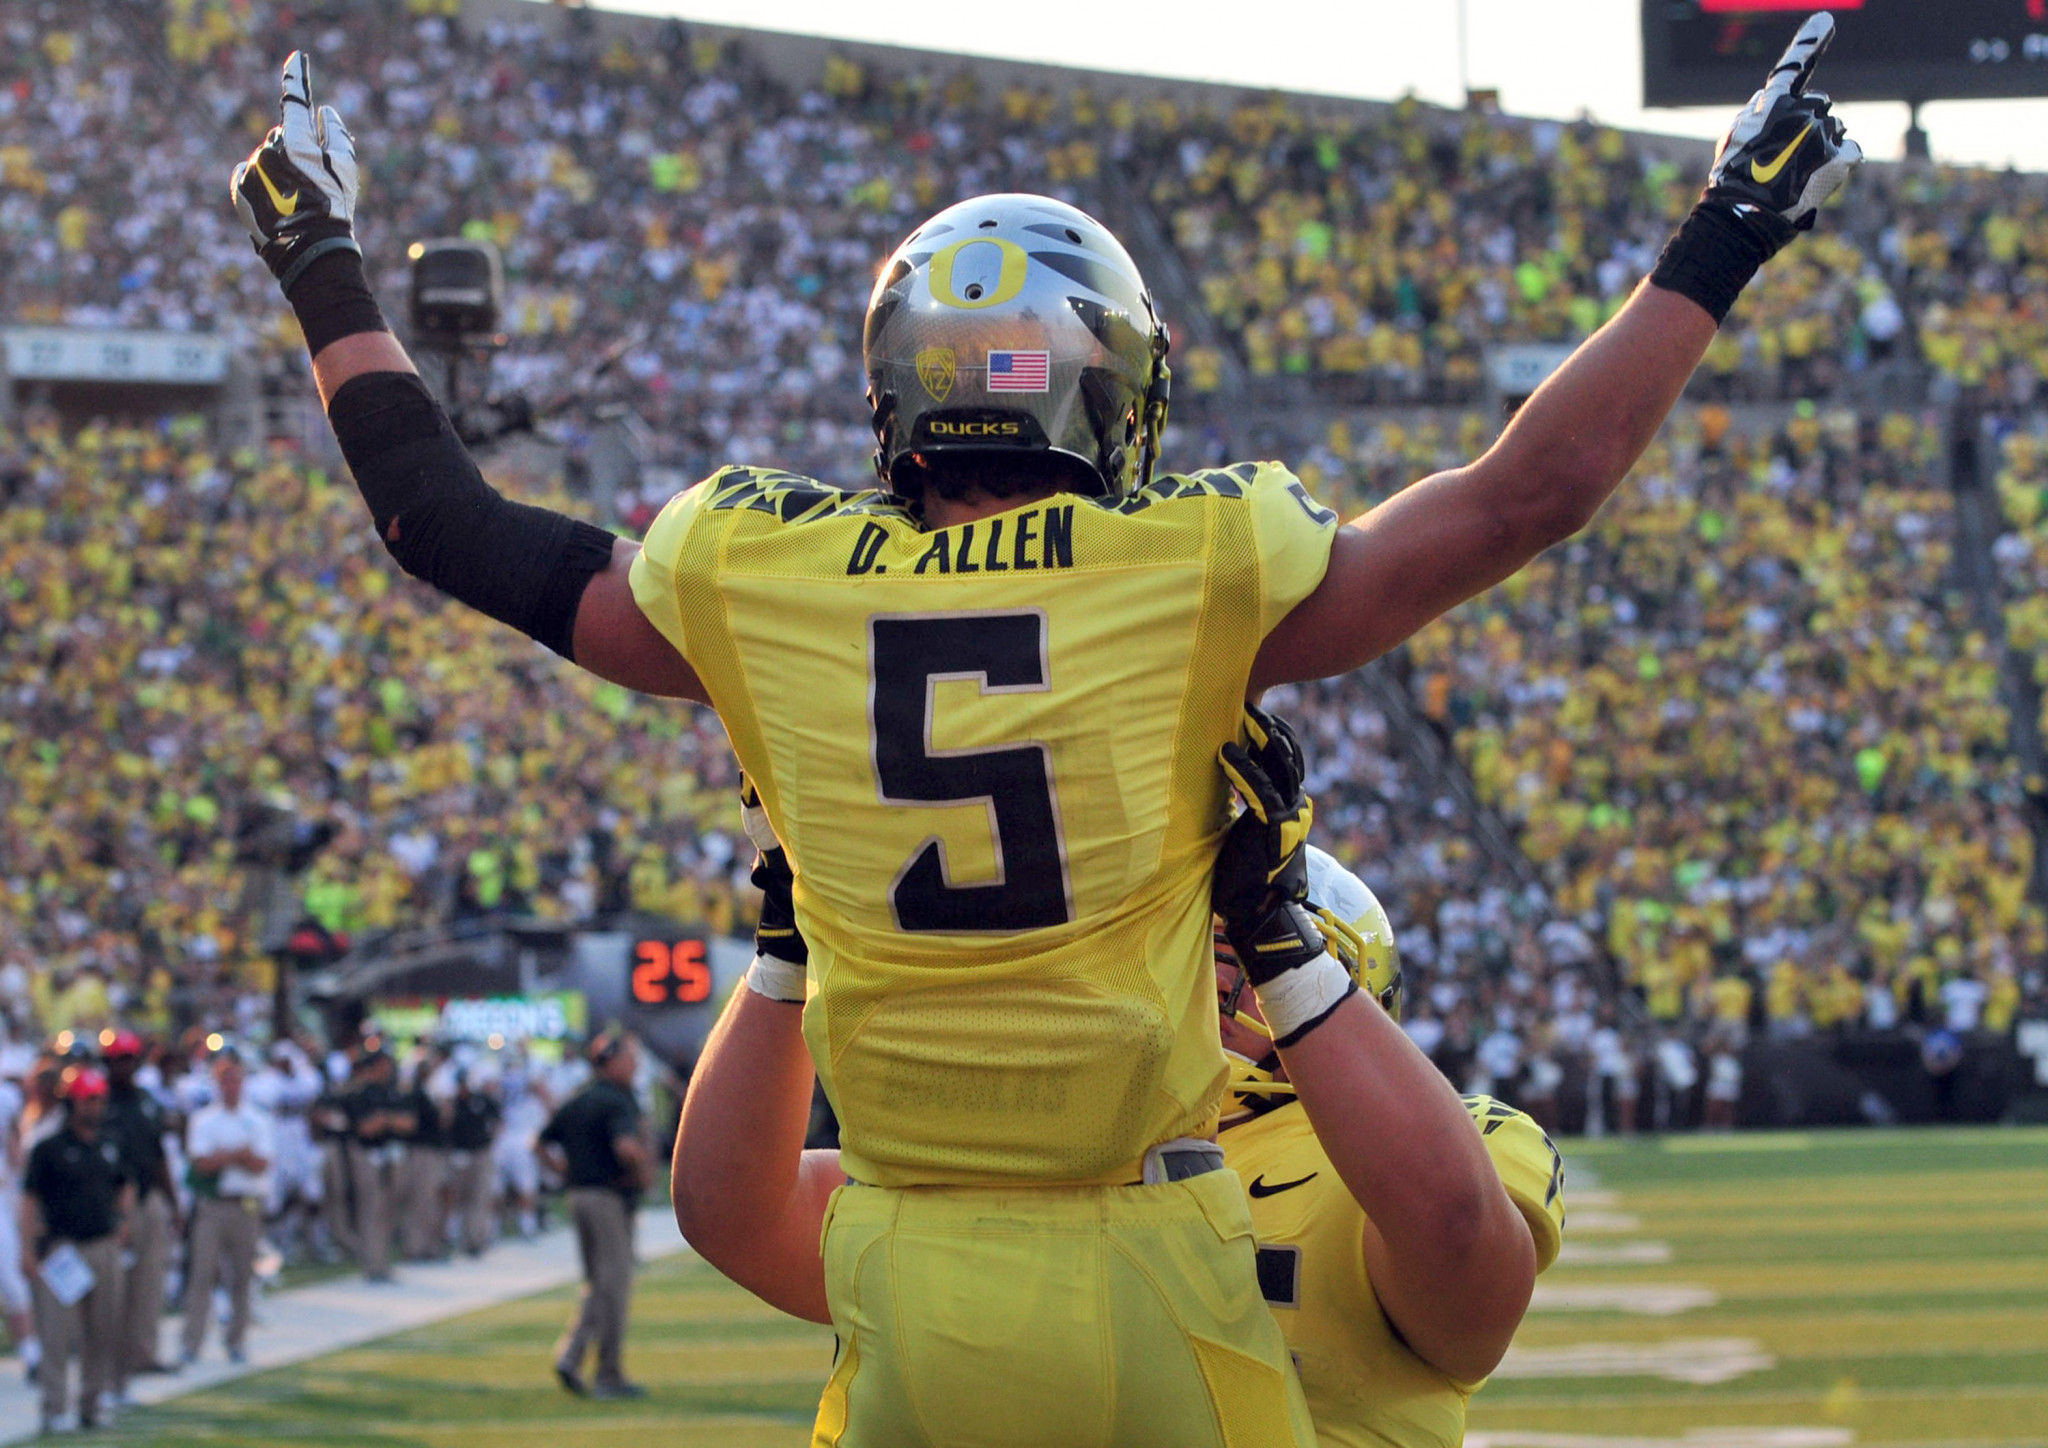 Devon Allen's American football exploits with the Oregon Ducks give him unique national recognition among American rack and field athletes ©Getty Images